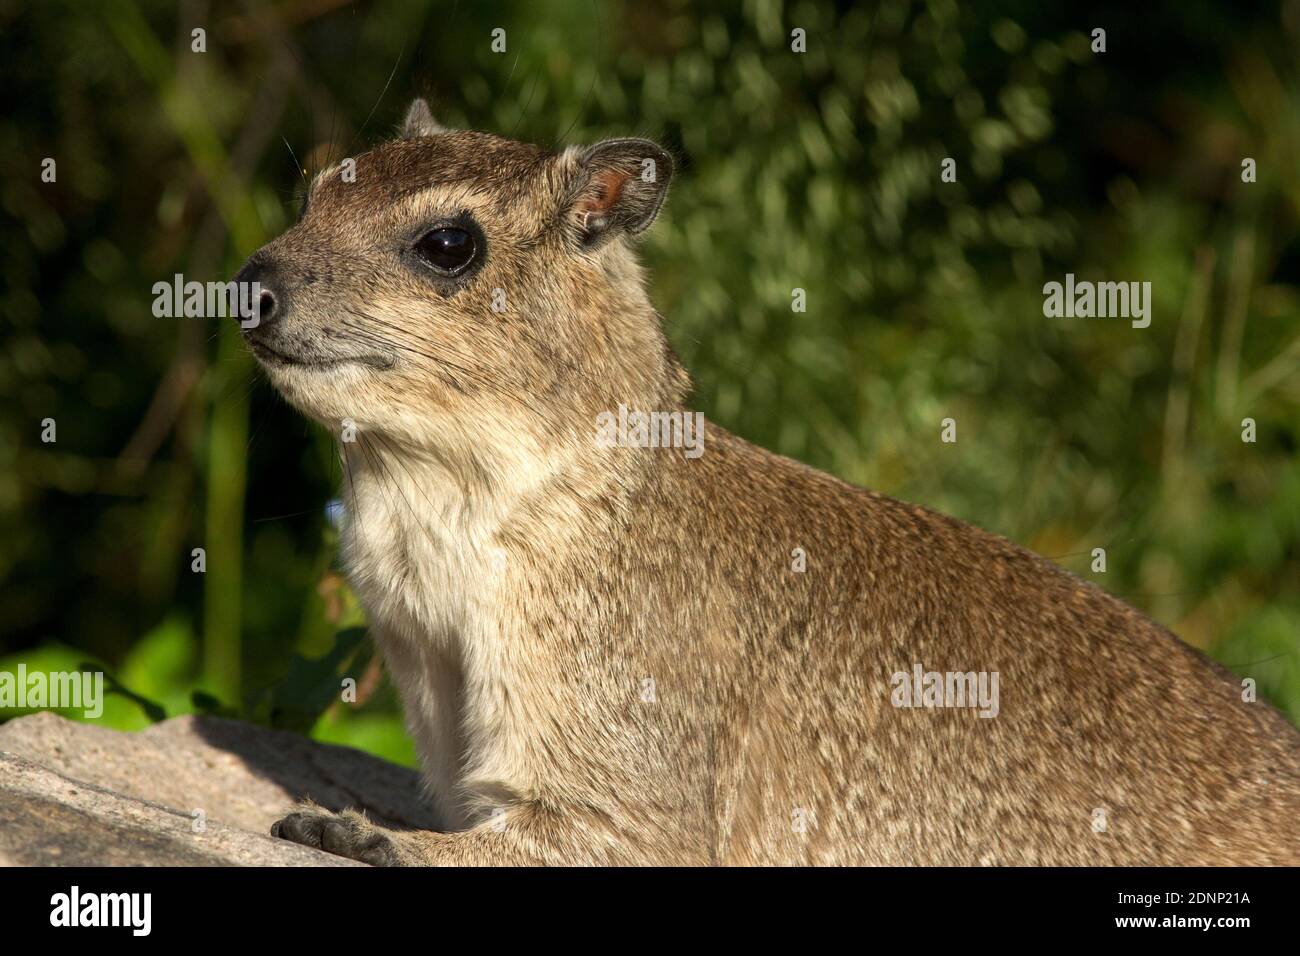 The Bush Hyrax is slightly smaller and has a narrower head than it's close cousin the Rock Hyrax. They often associate together in rocky habitat Stock Photo